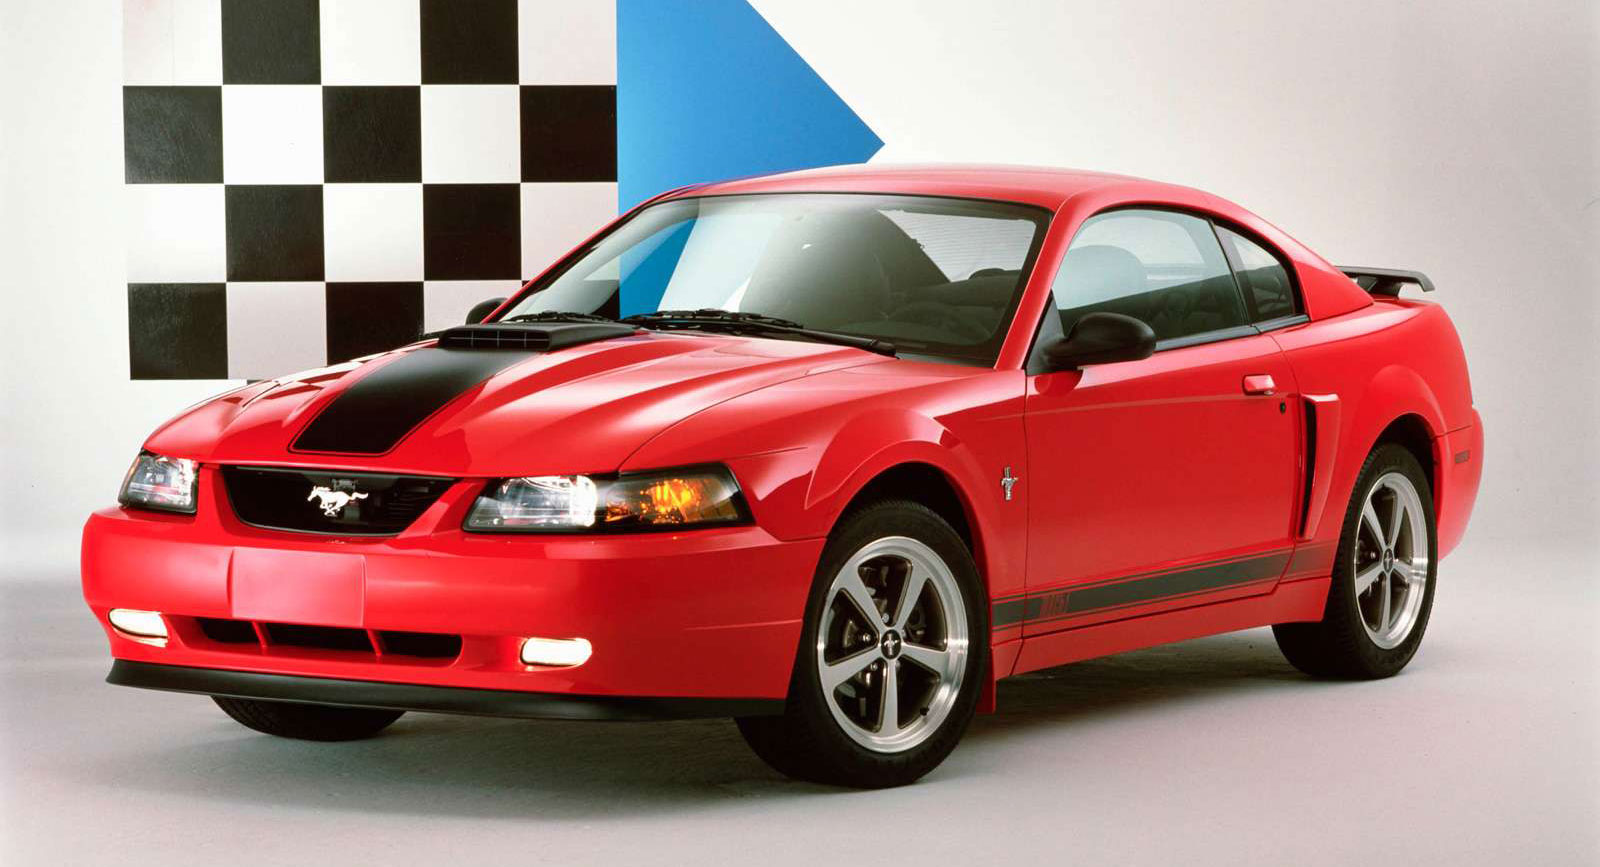 Mach 1 Trademarked Again--Possibly For 2015 Ford Mustang